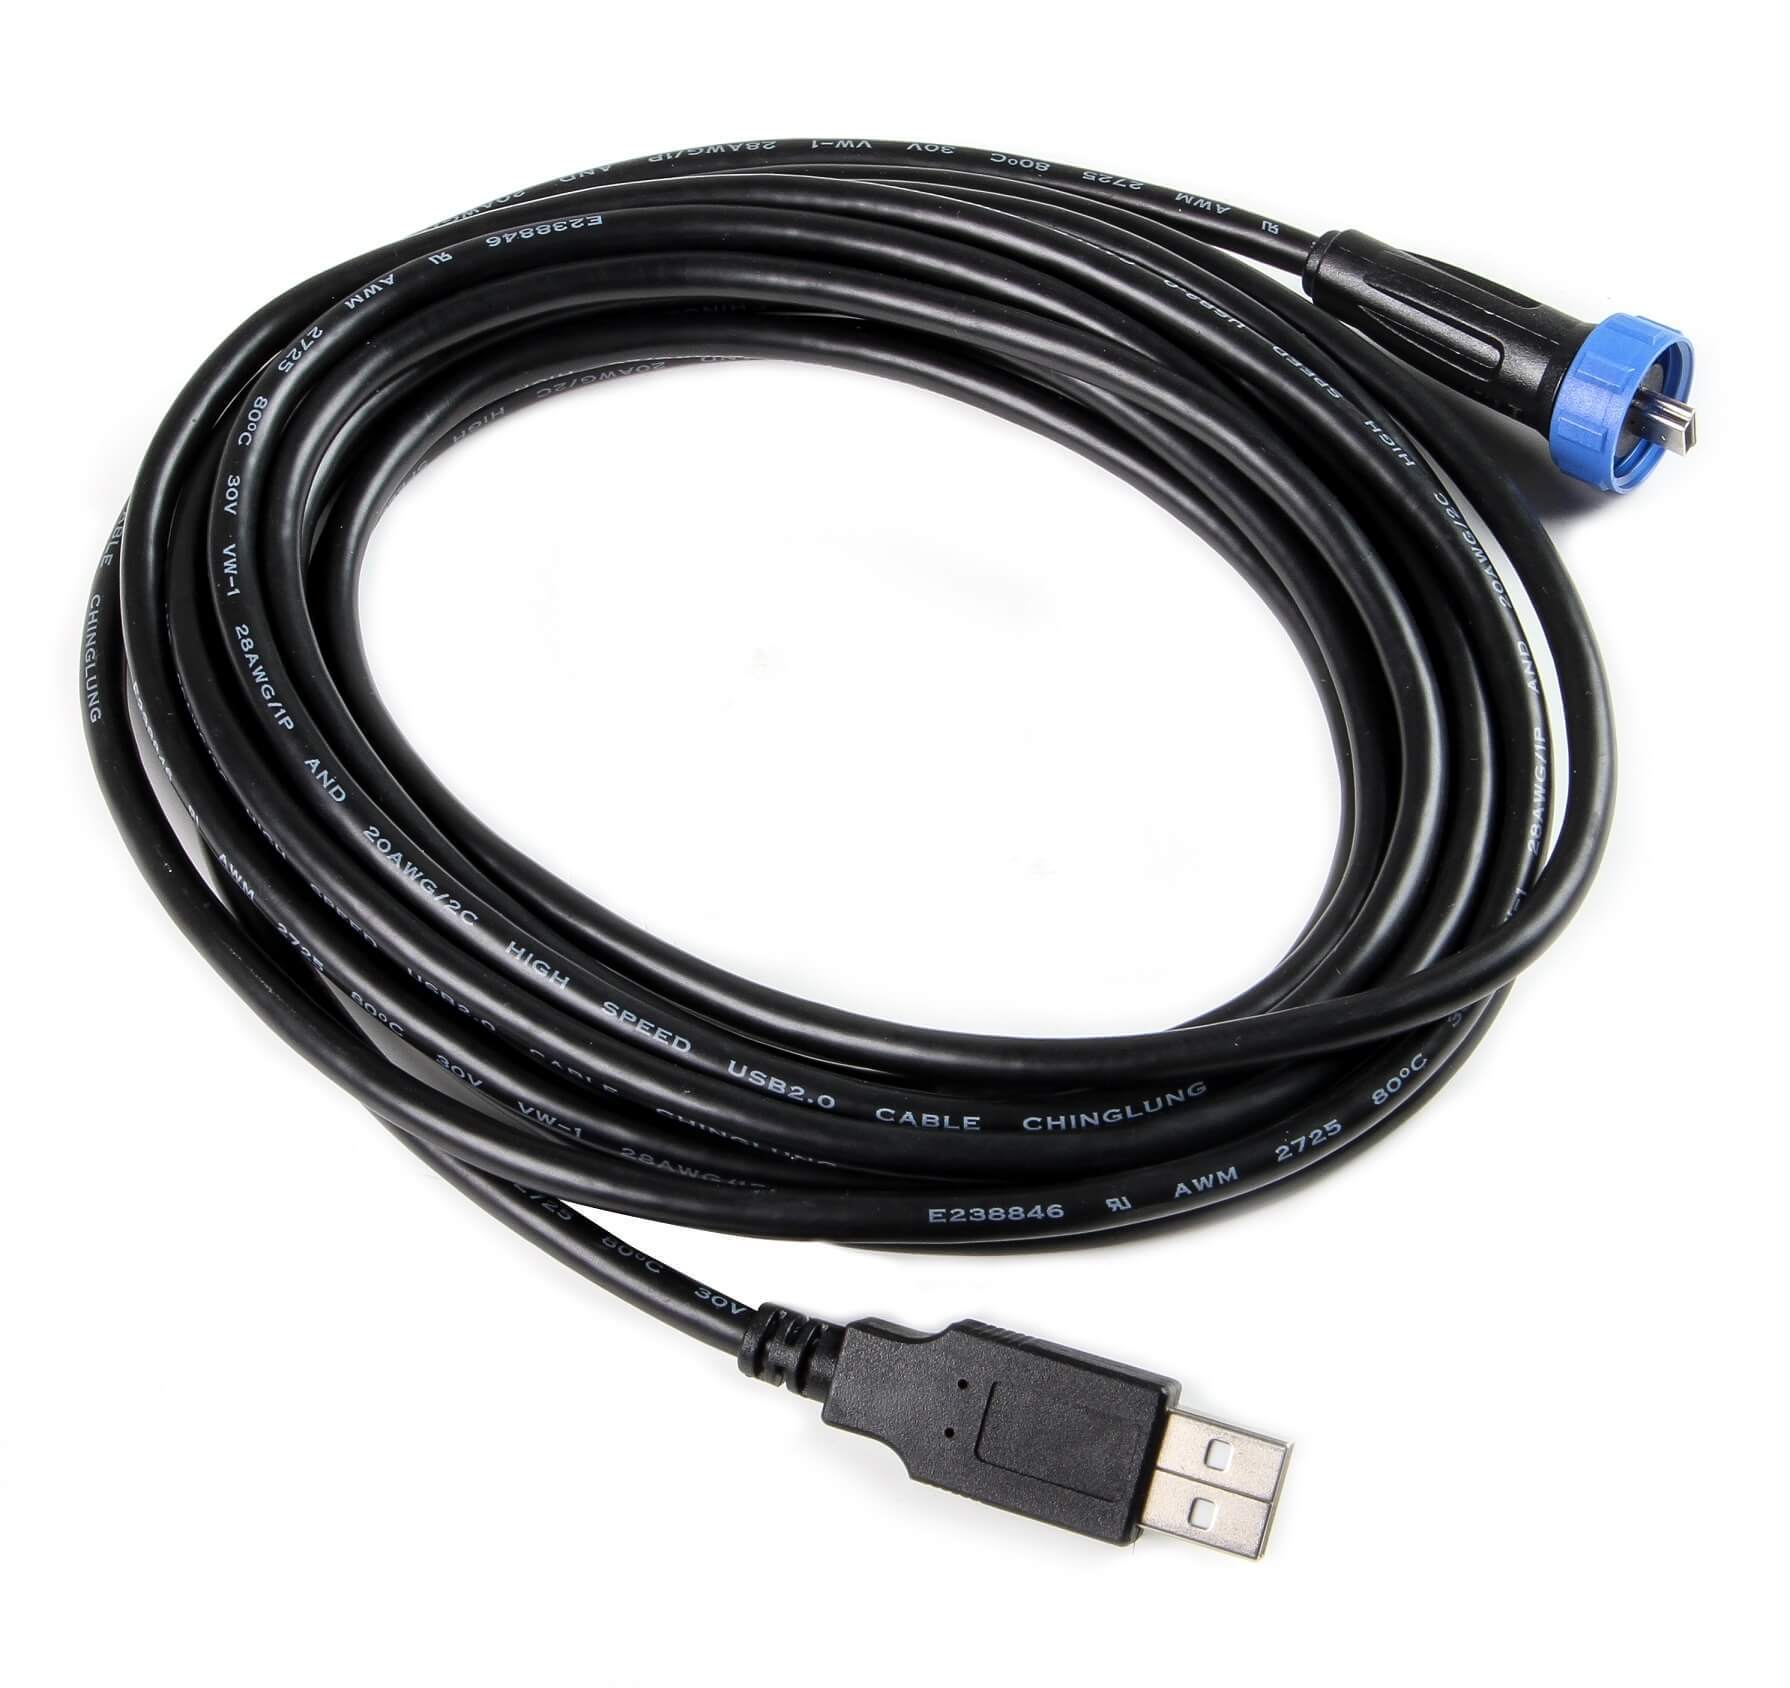 EFI Systems USB Cables Performance Holley Performance display